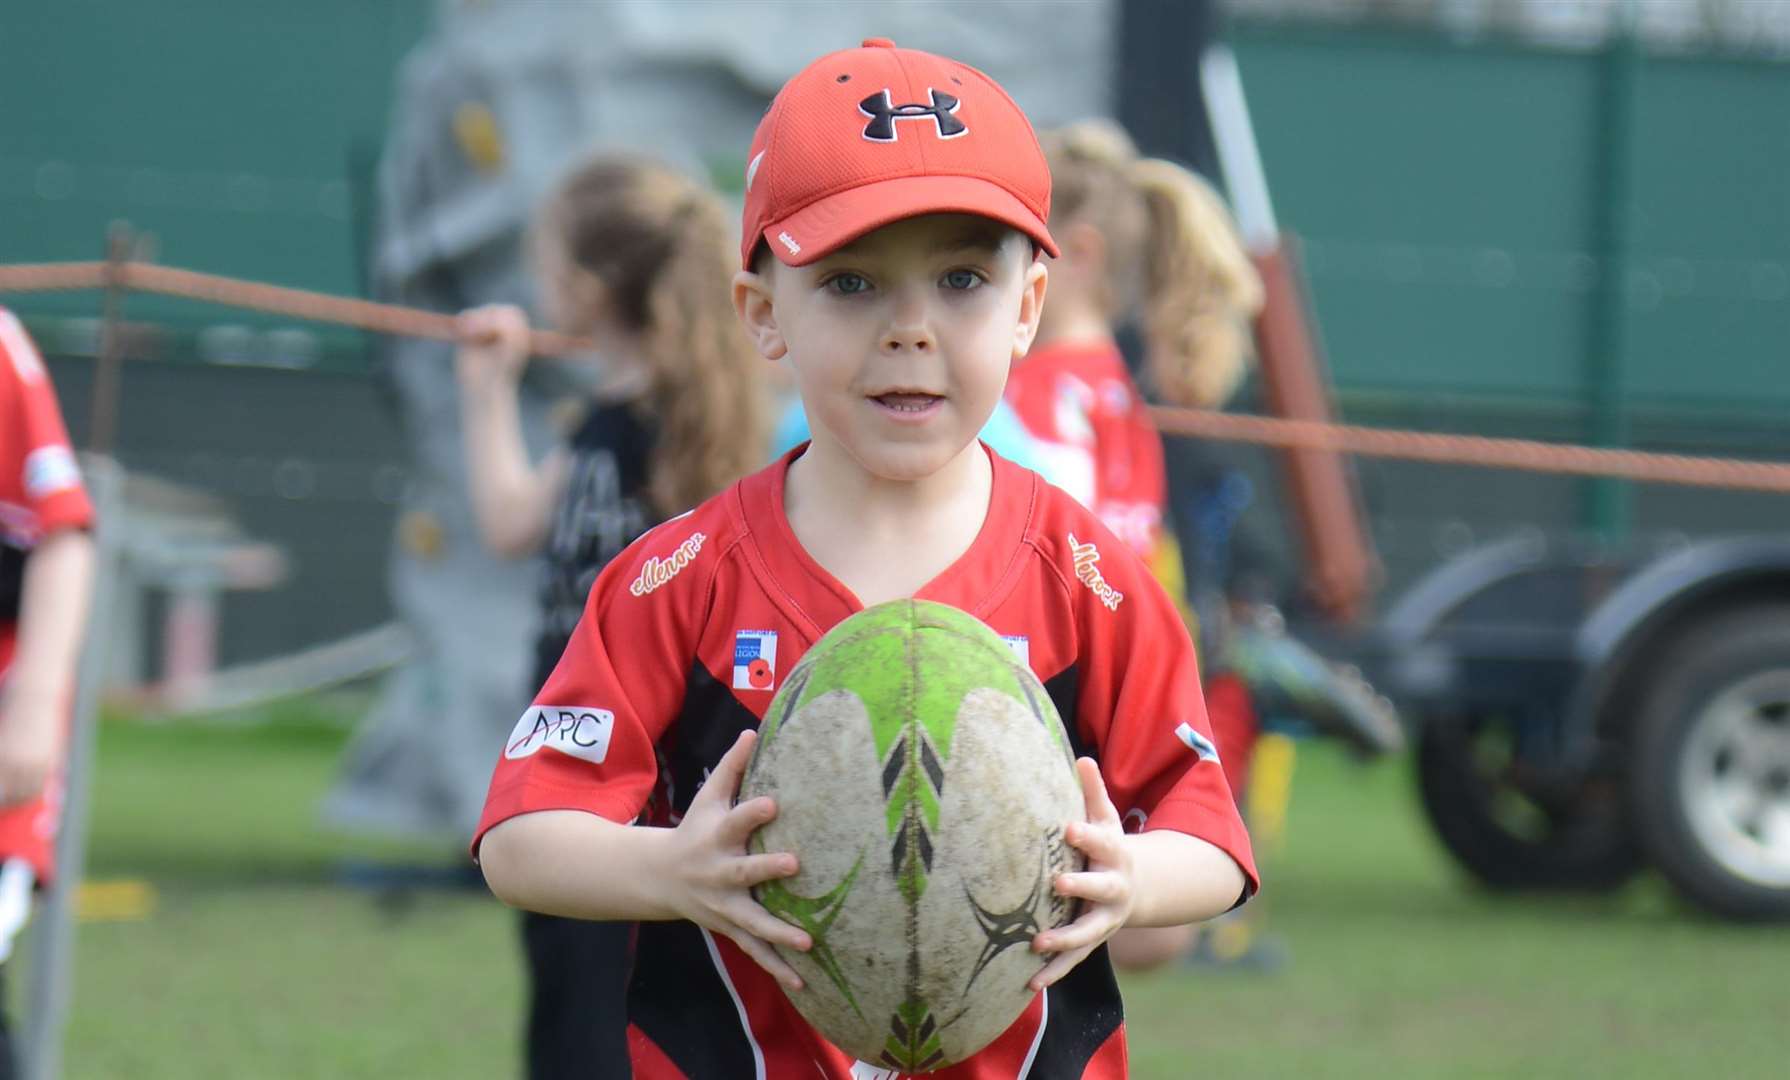 An under 6 age group player in action